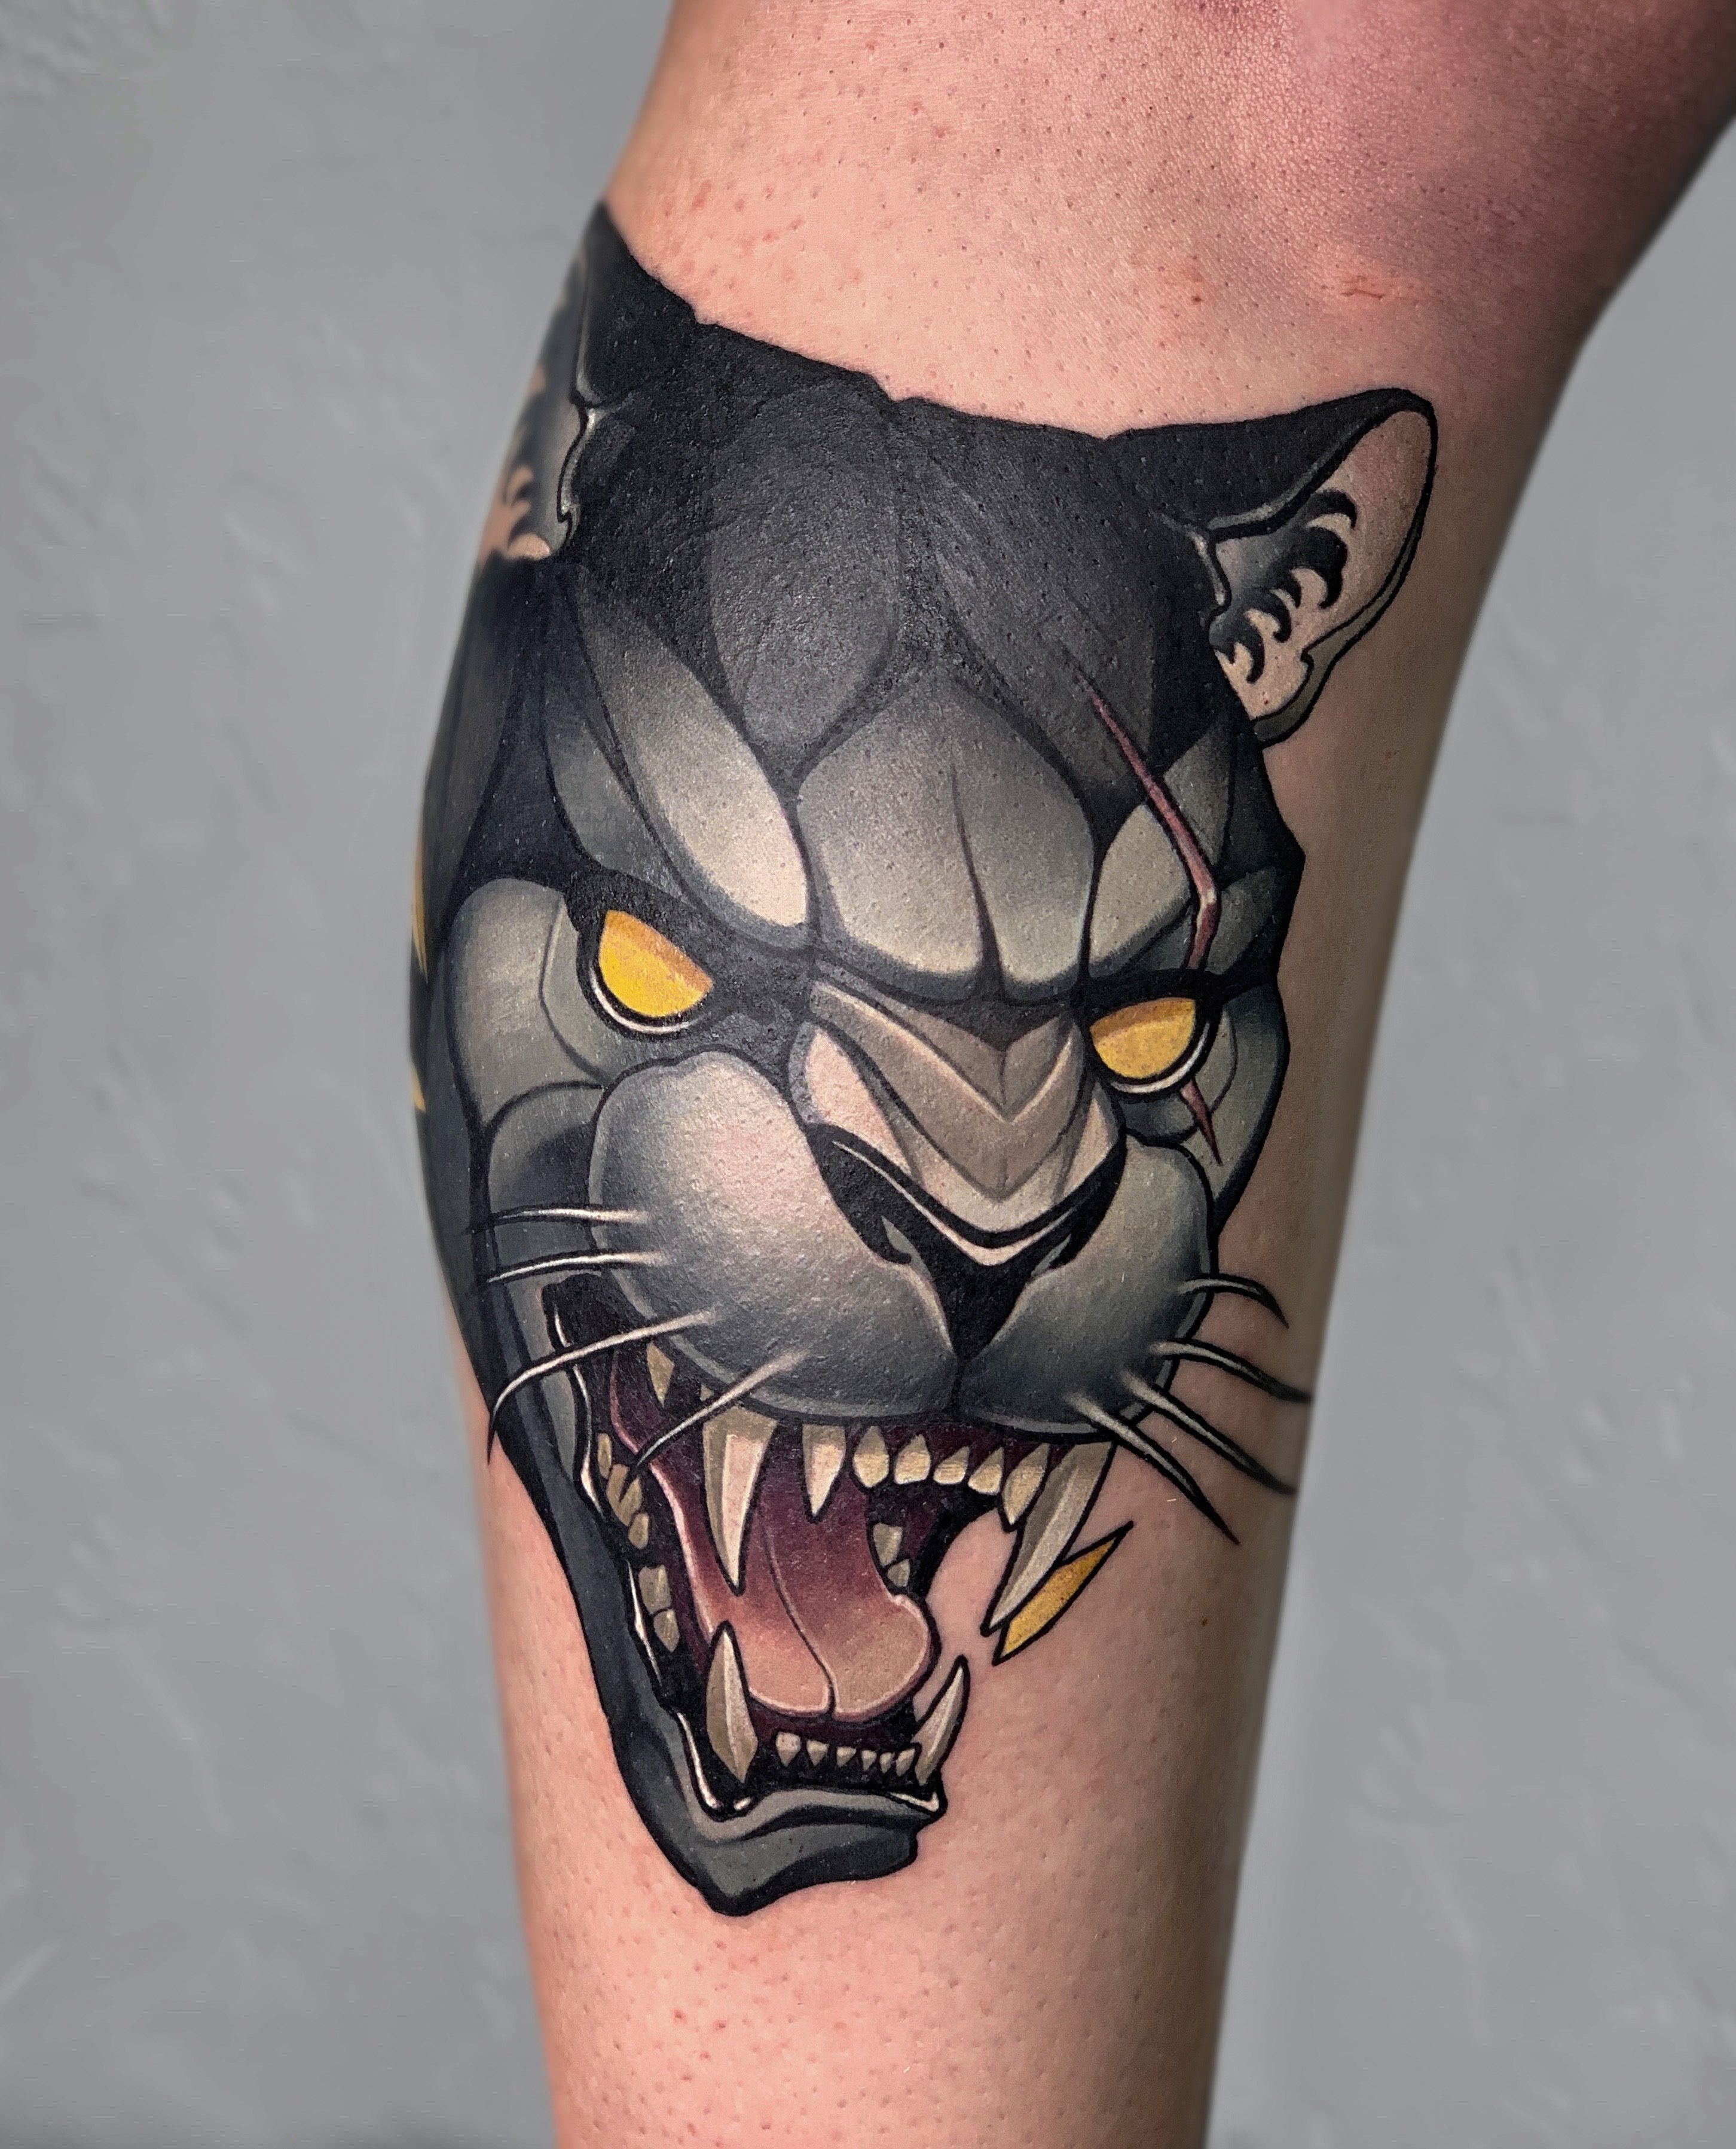 Dragon Rays Tattoo  Neo traditional flavor black panther Fun little  piece  Facebook